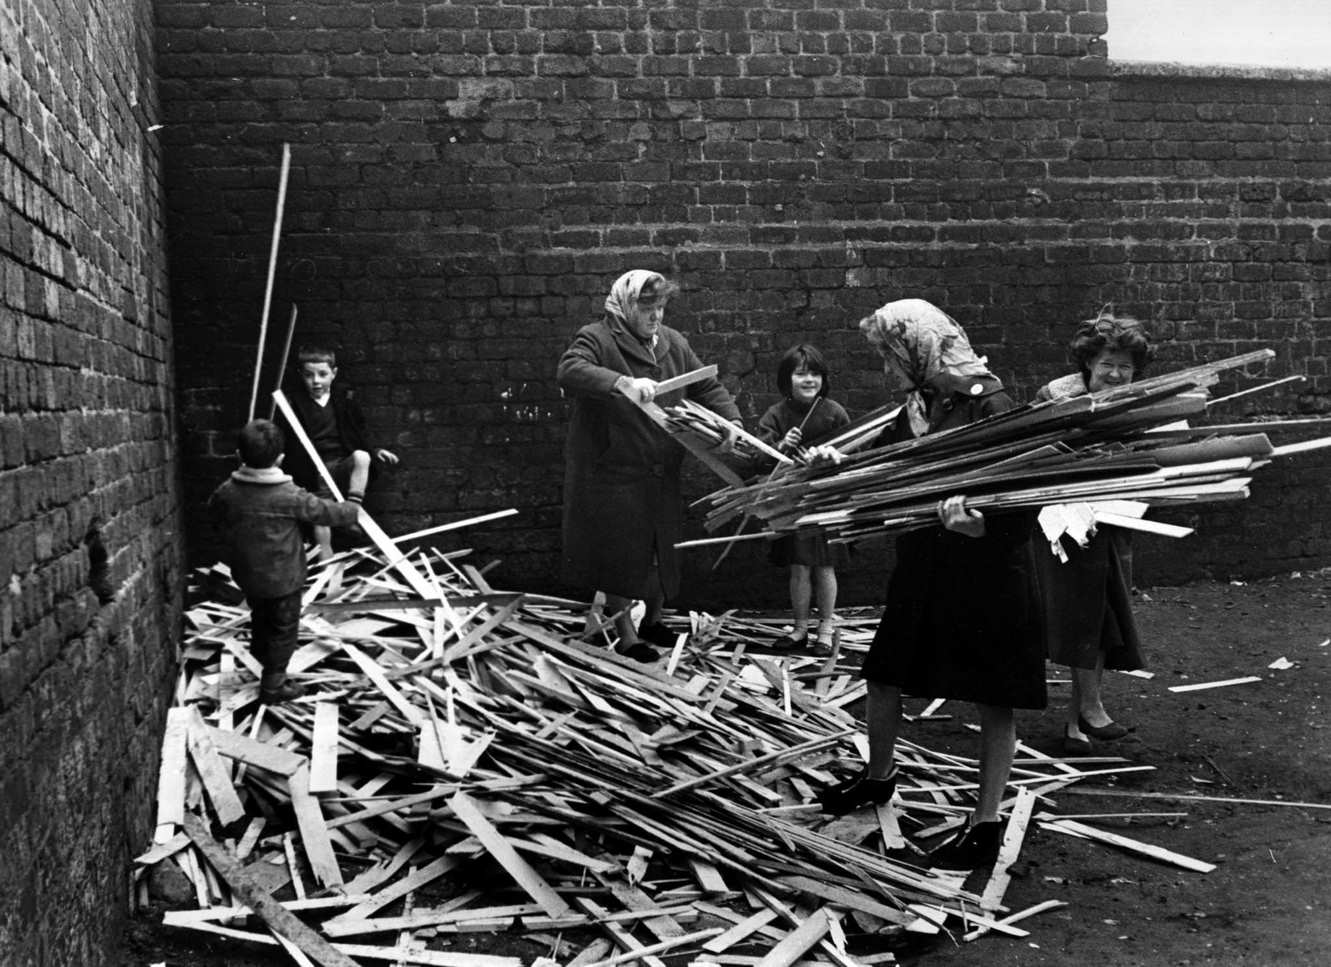 Residents of the Gorbals area of Glasgow collecting firewood among partially-demolished tenement buildings, 1960